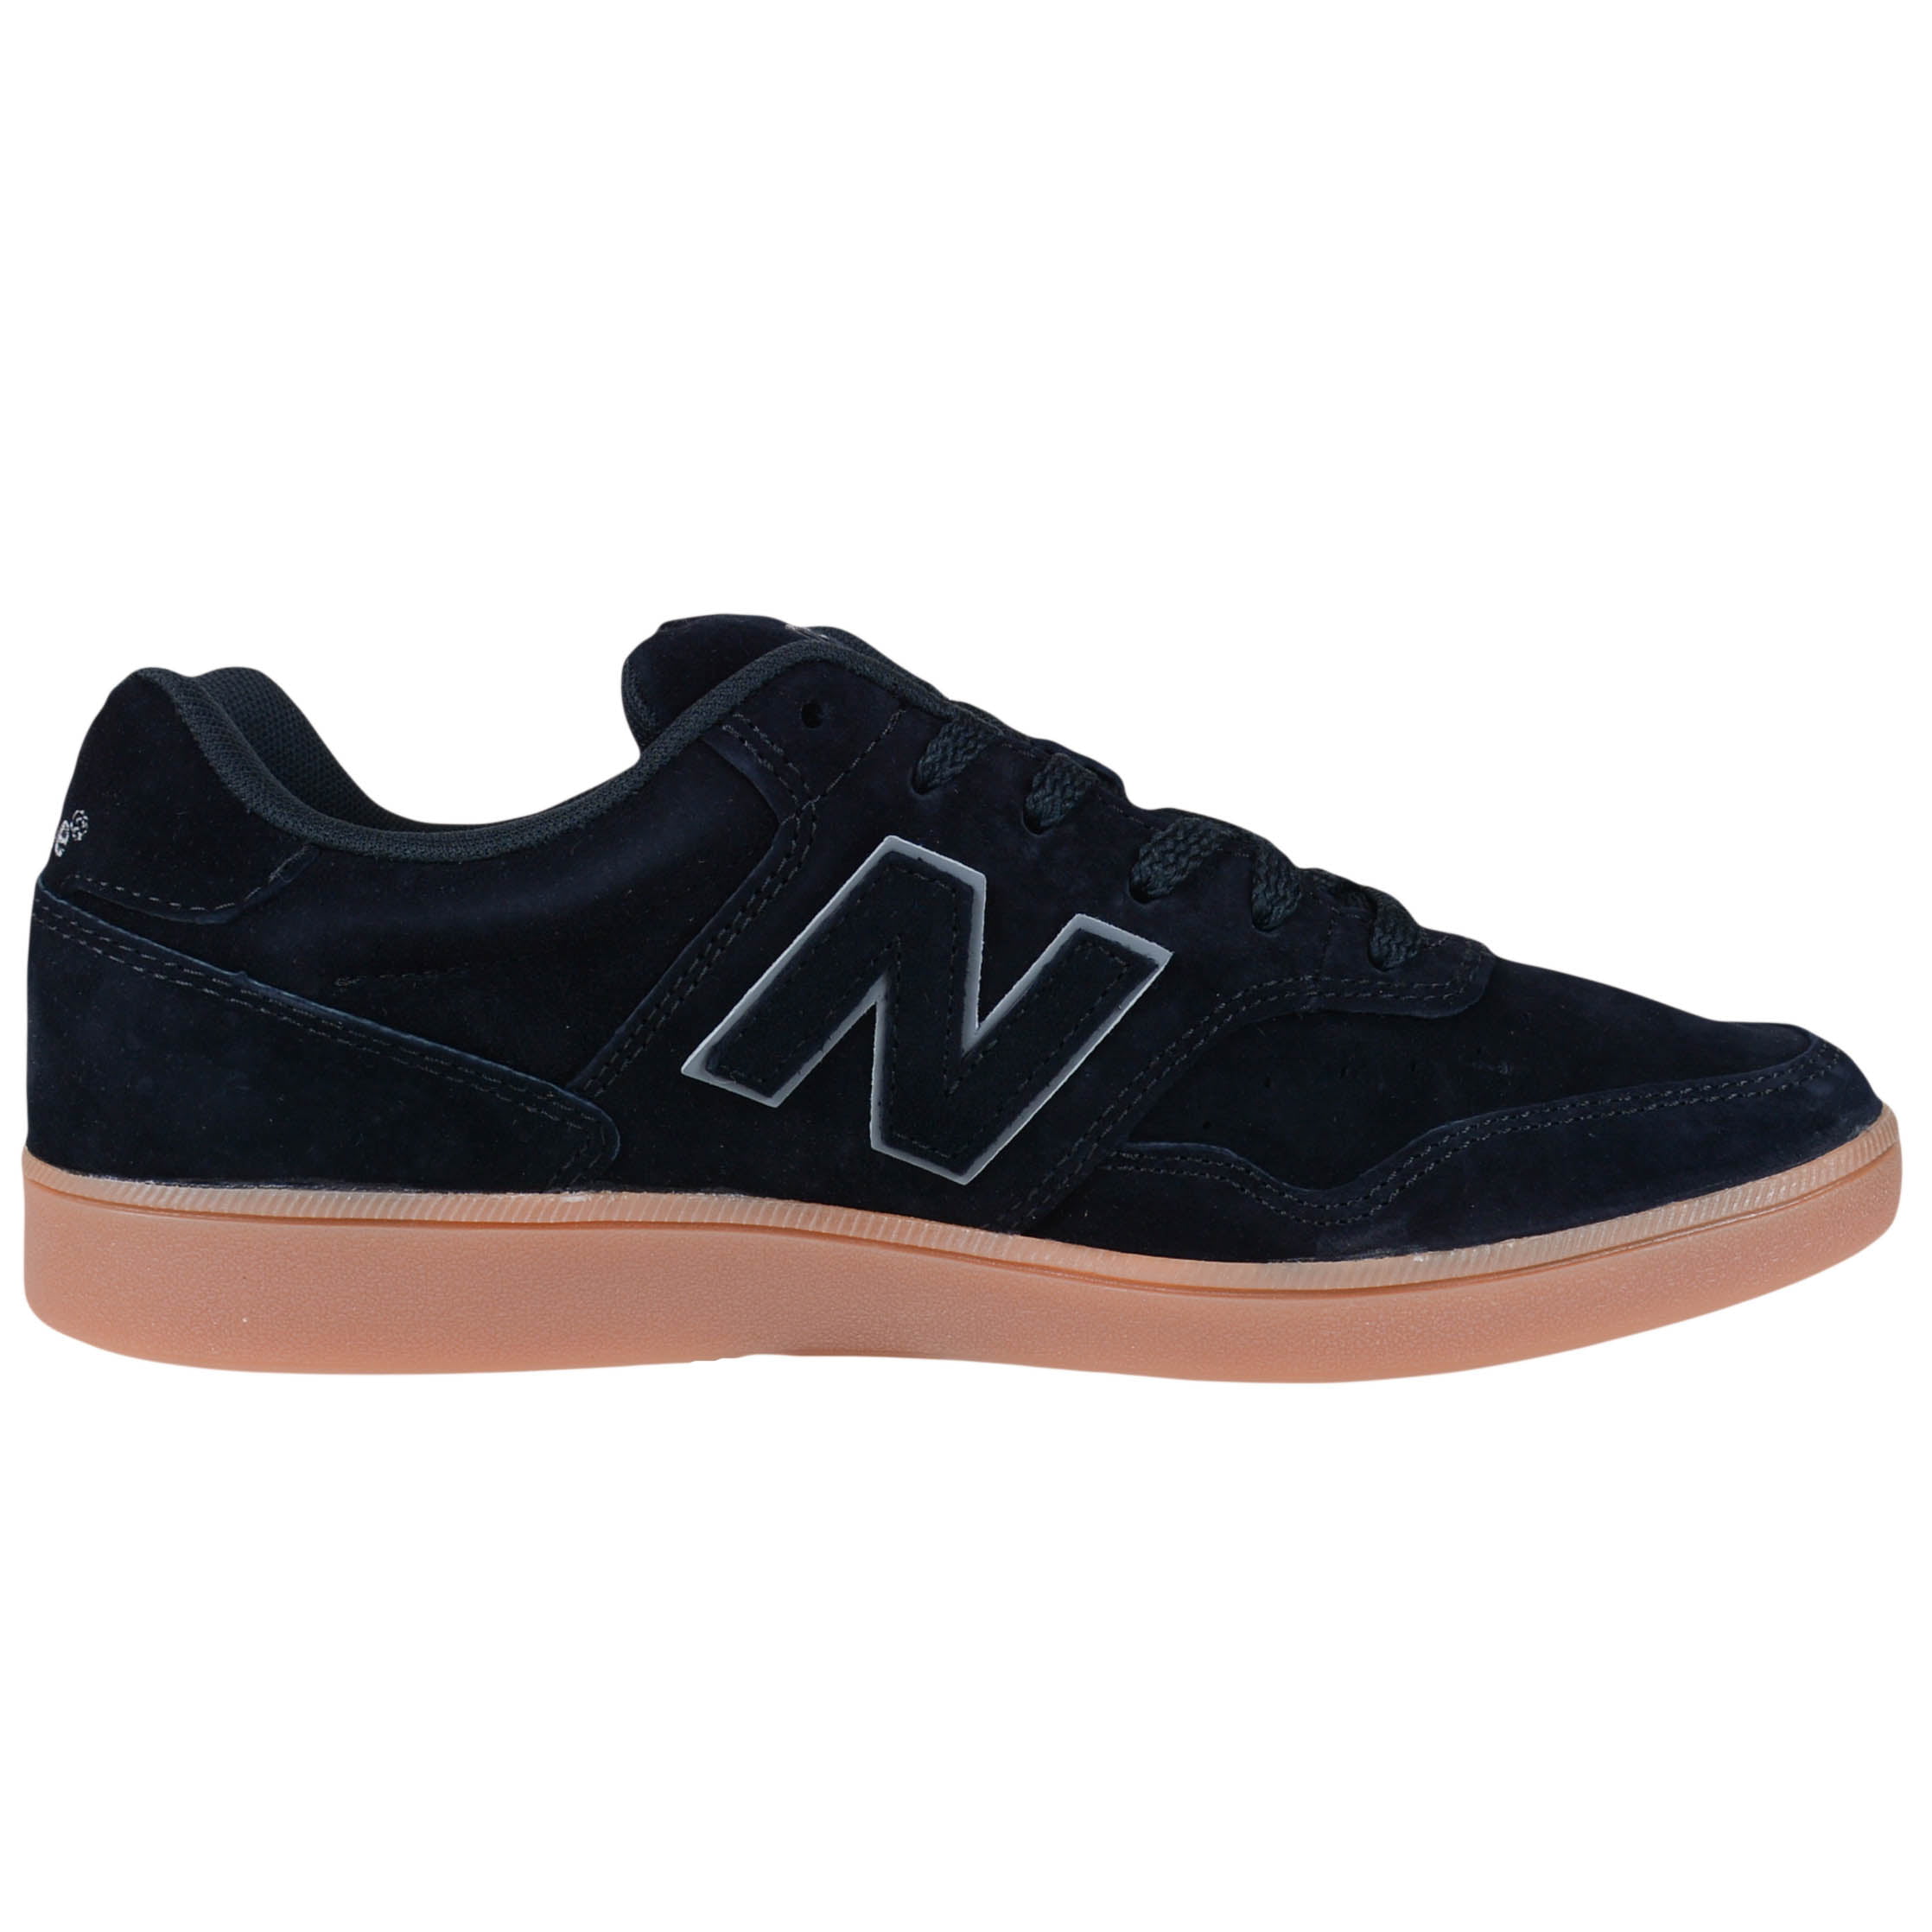 New Balance - New Balance Men's Ct288 Bl Ankle-High Suede Fashion ...